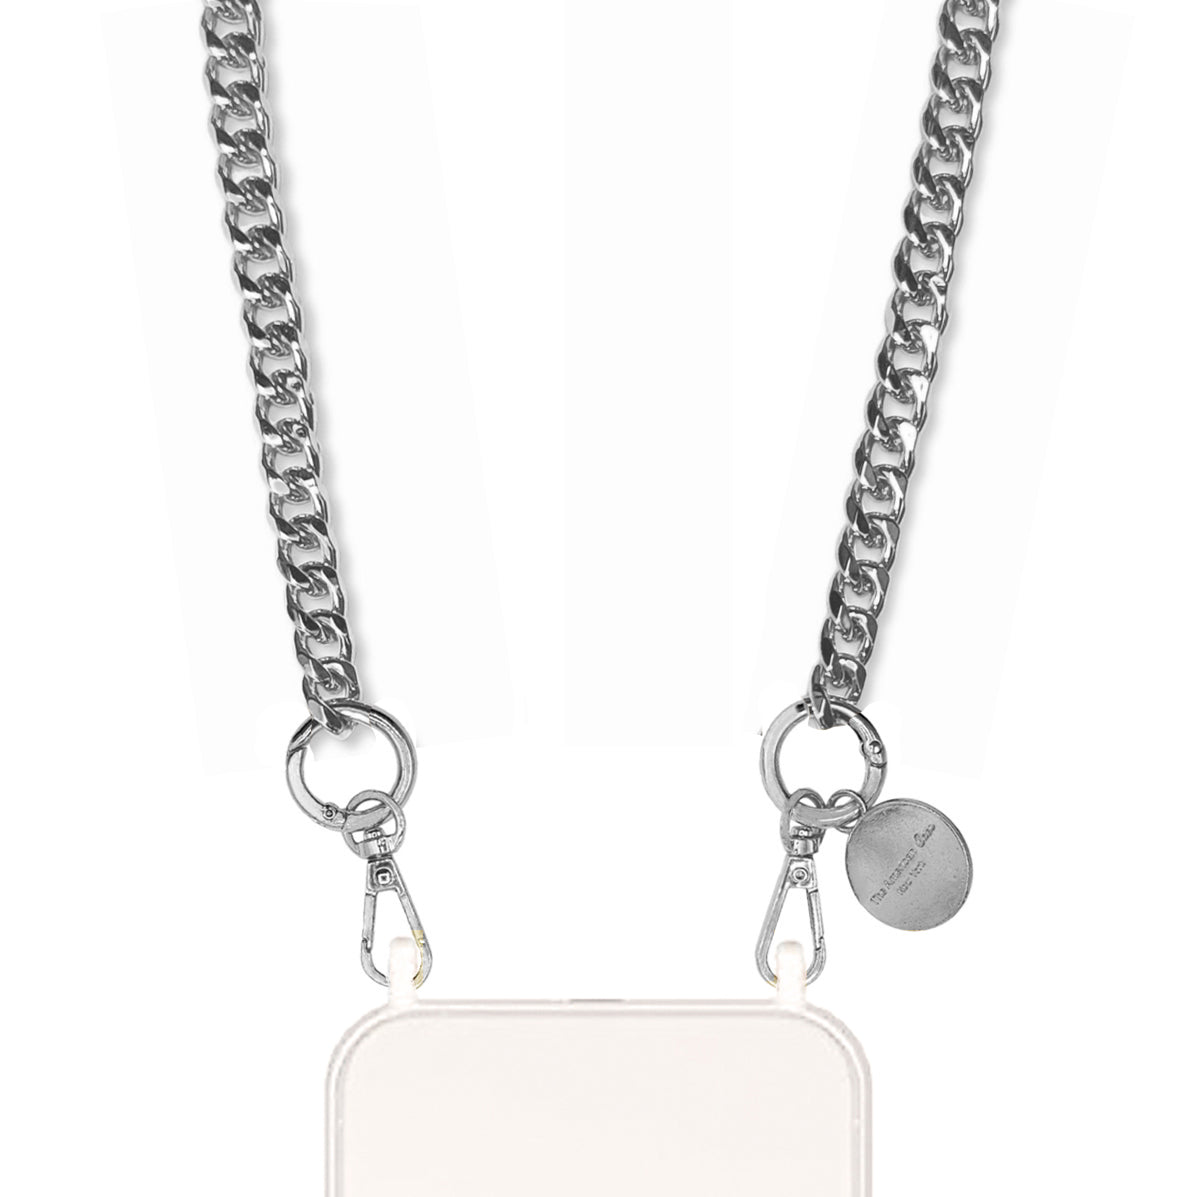 Storm - Silver Crossbody Phone Chain with Silver Carabiners